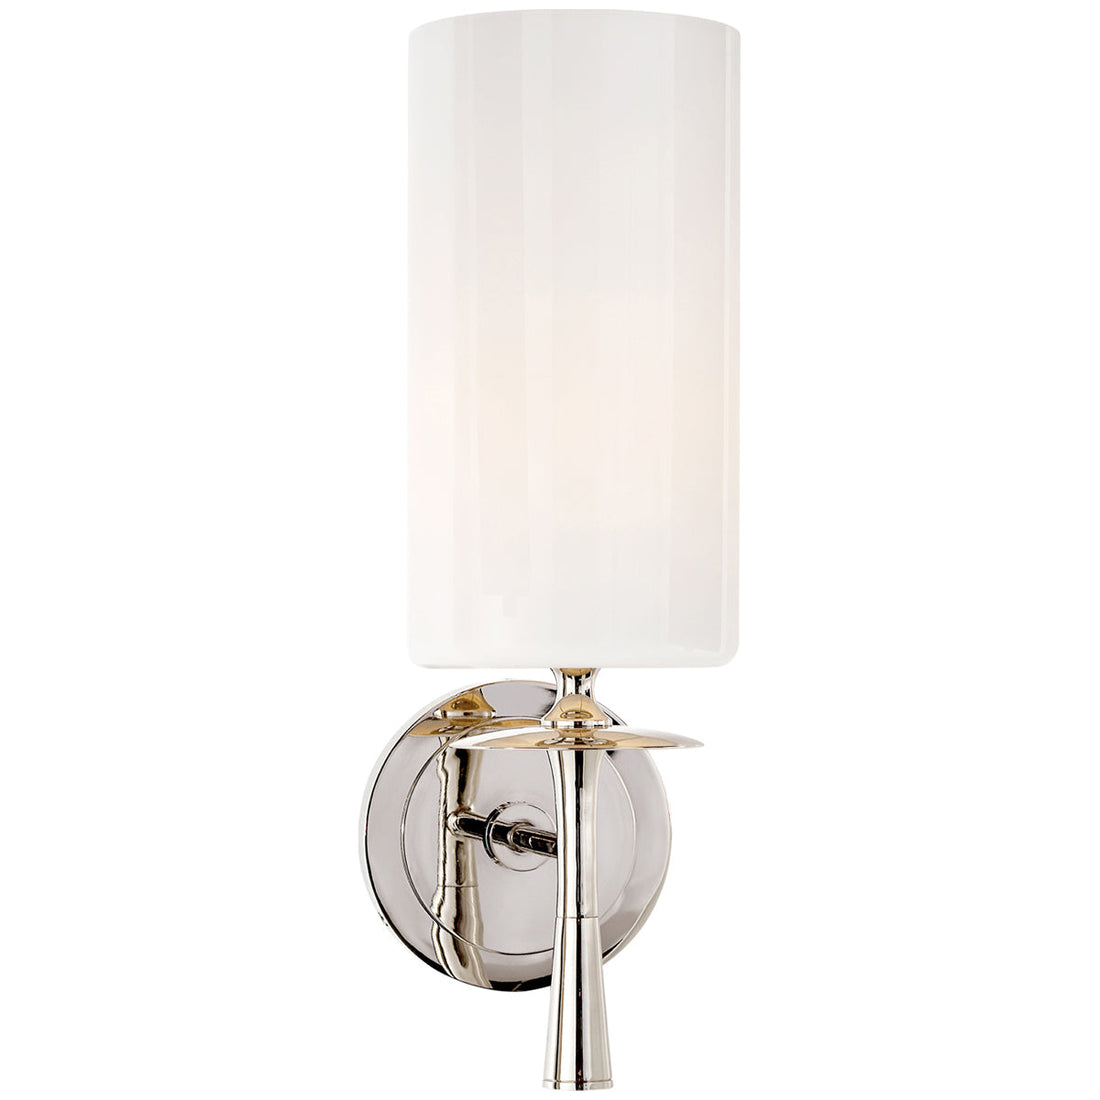 Visual Comfort Drunmore Single Sconce with White Glass Shade